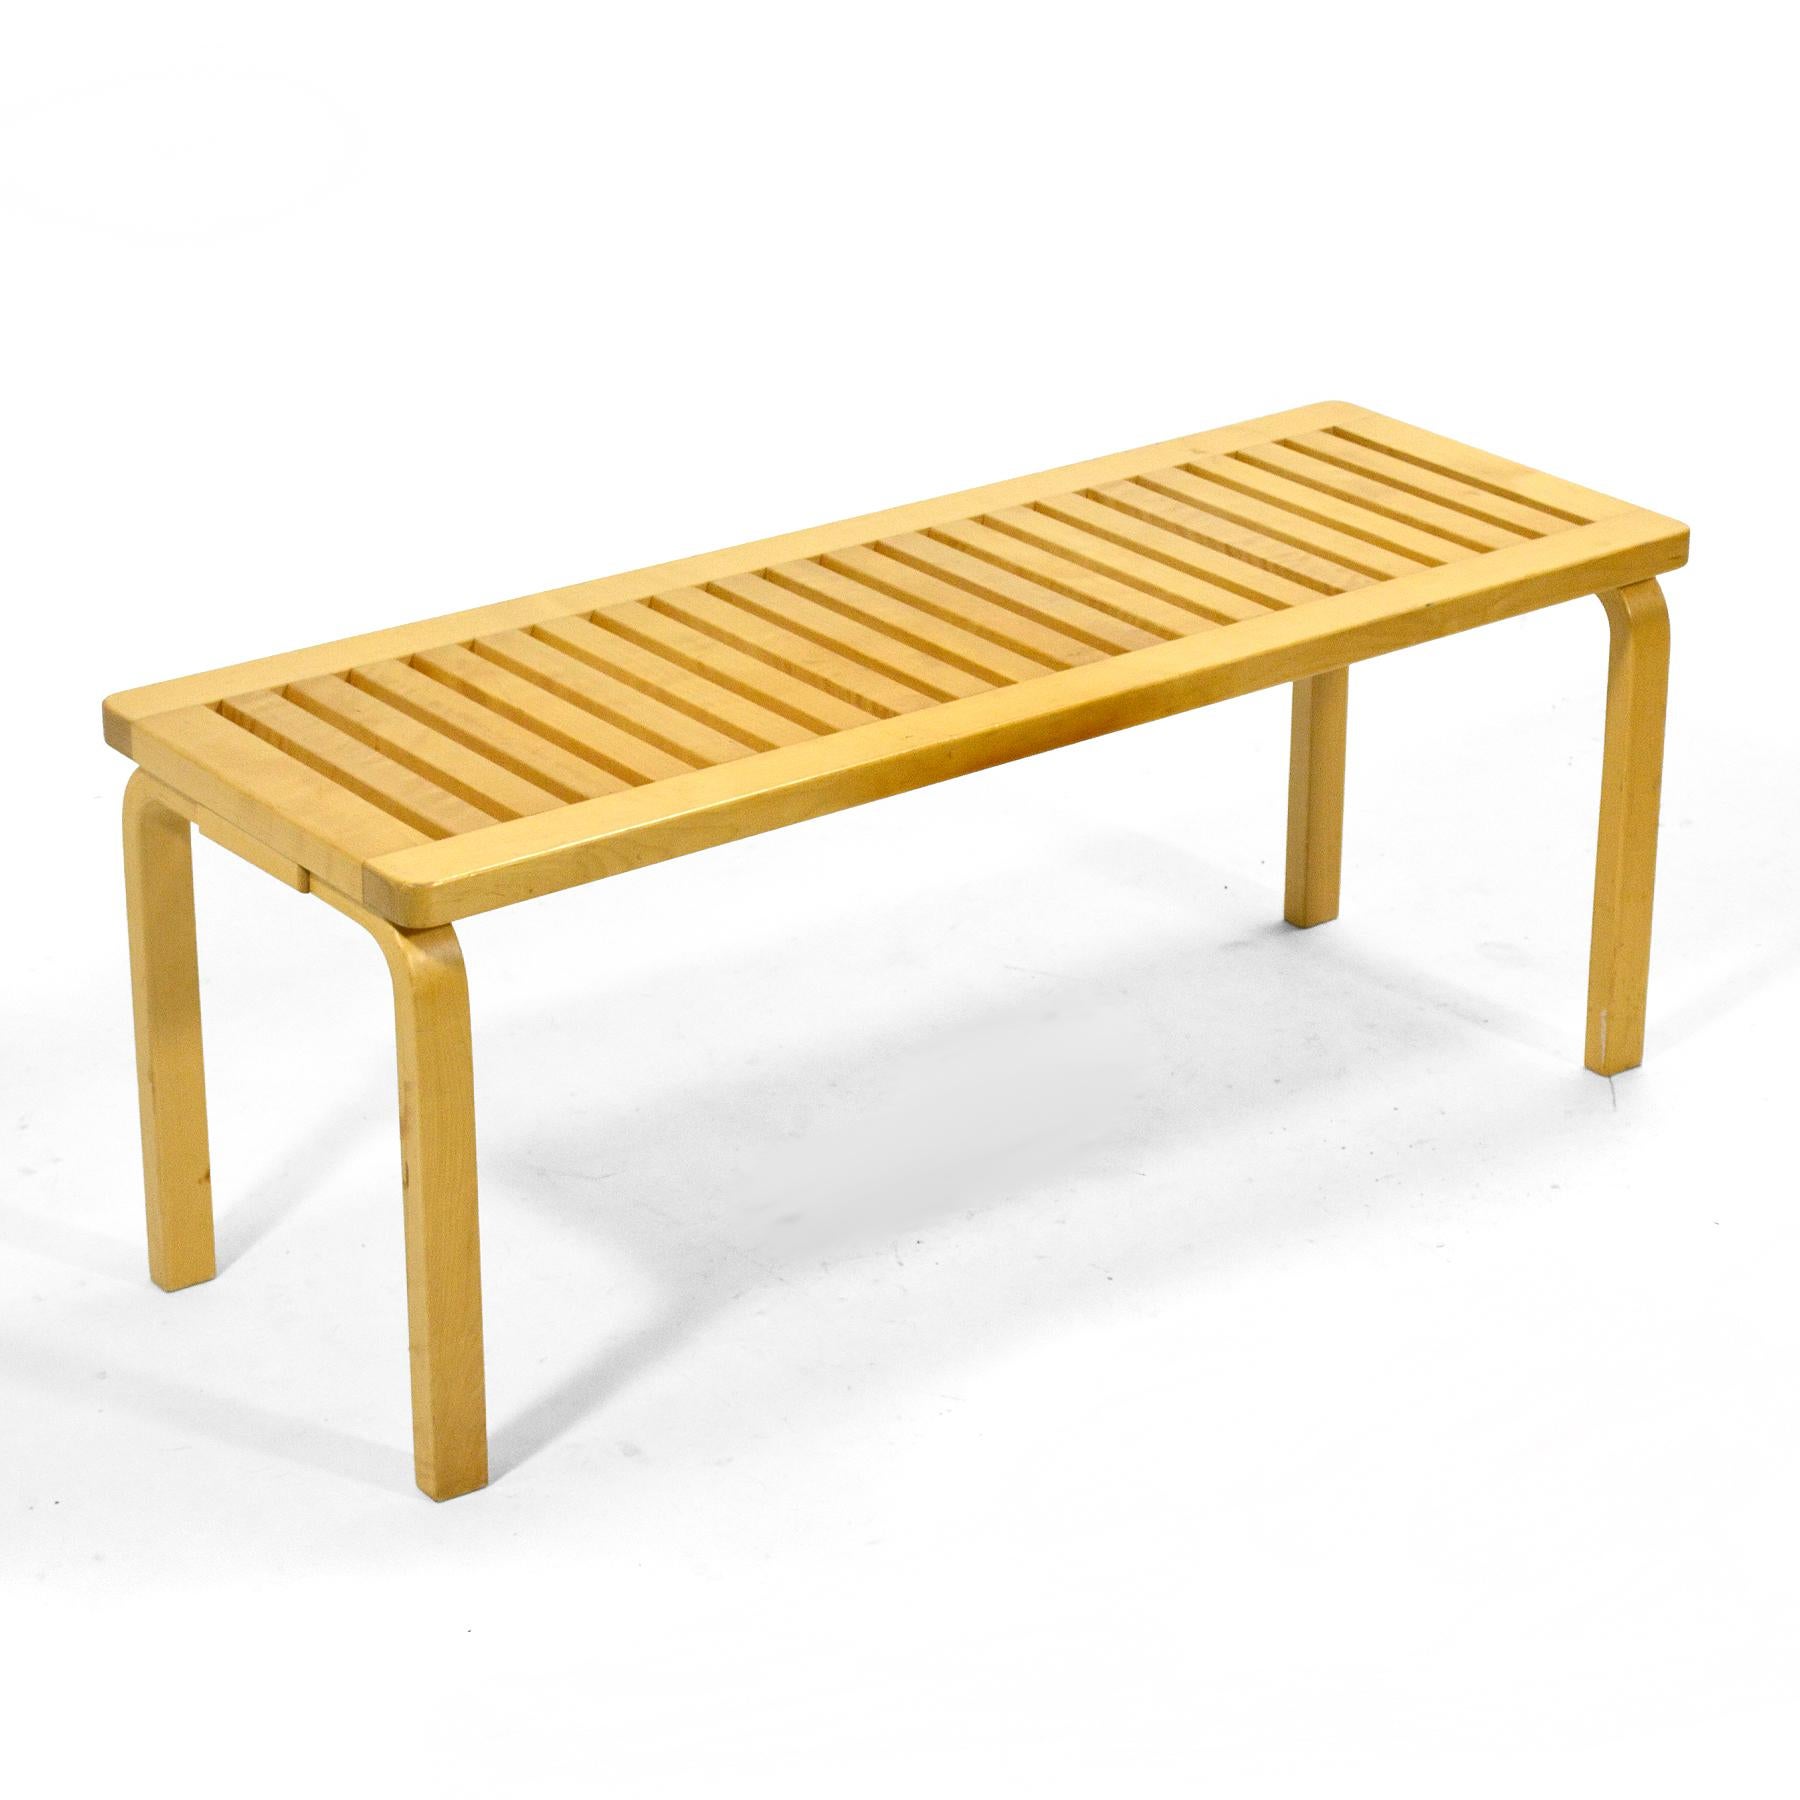 A classic Aalto design, this solid birch slat bench was produced made in Finland by Artek and sold in the U.S. by ICF.